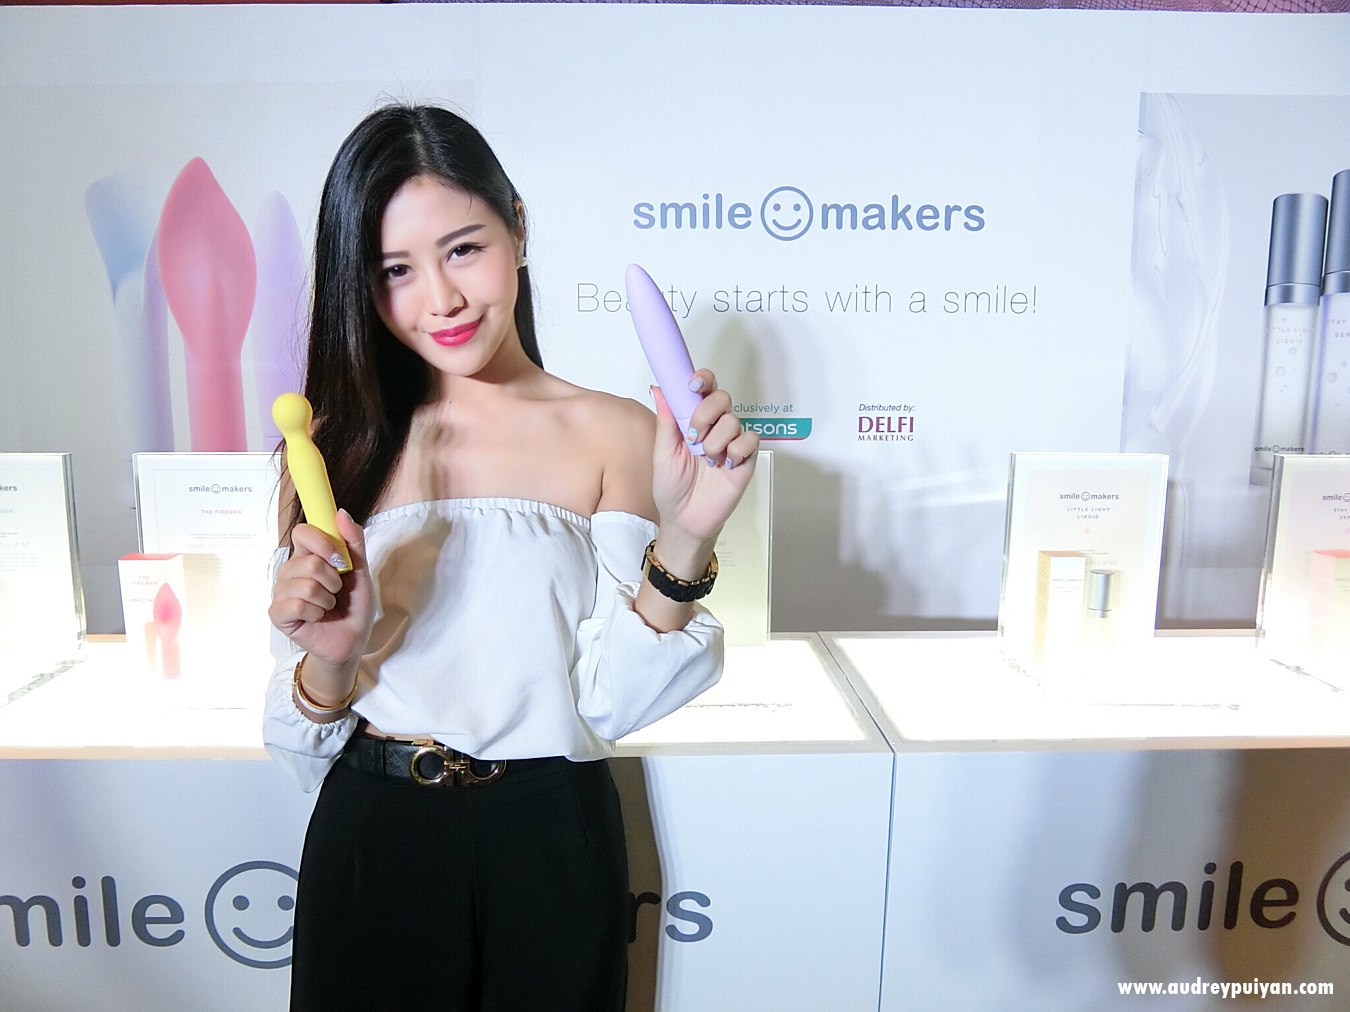 Don't you love the pop and vibrant colours of the Smile Makers persona...